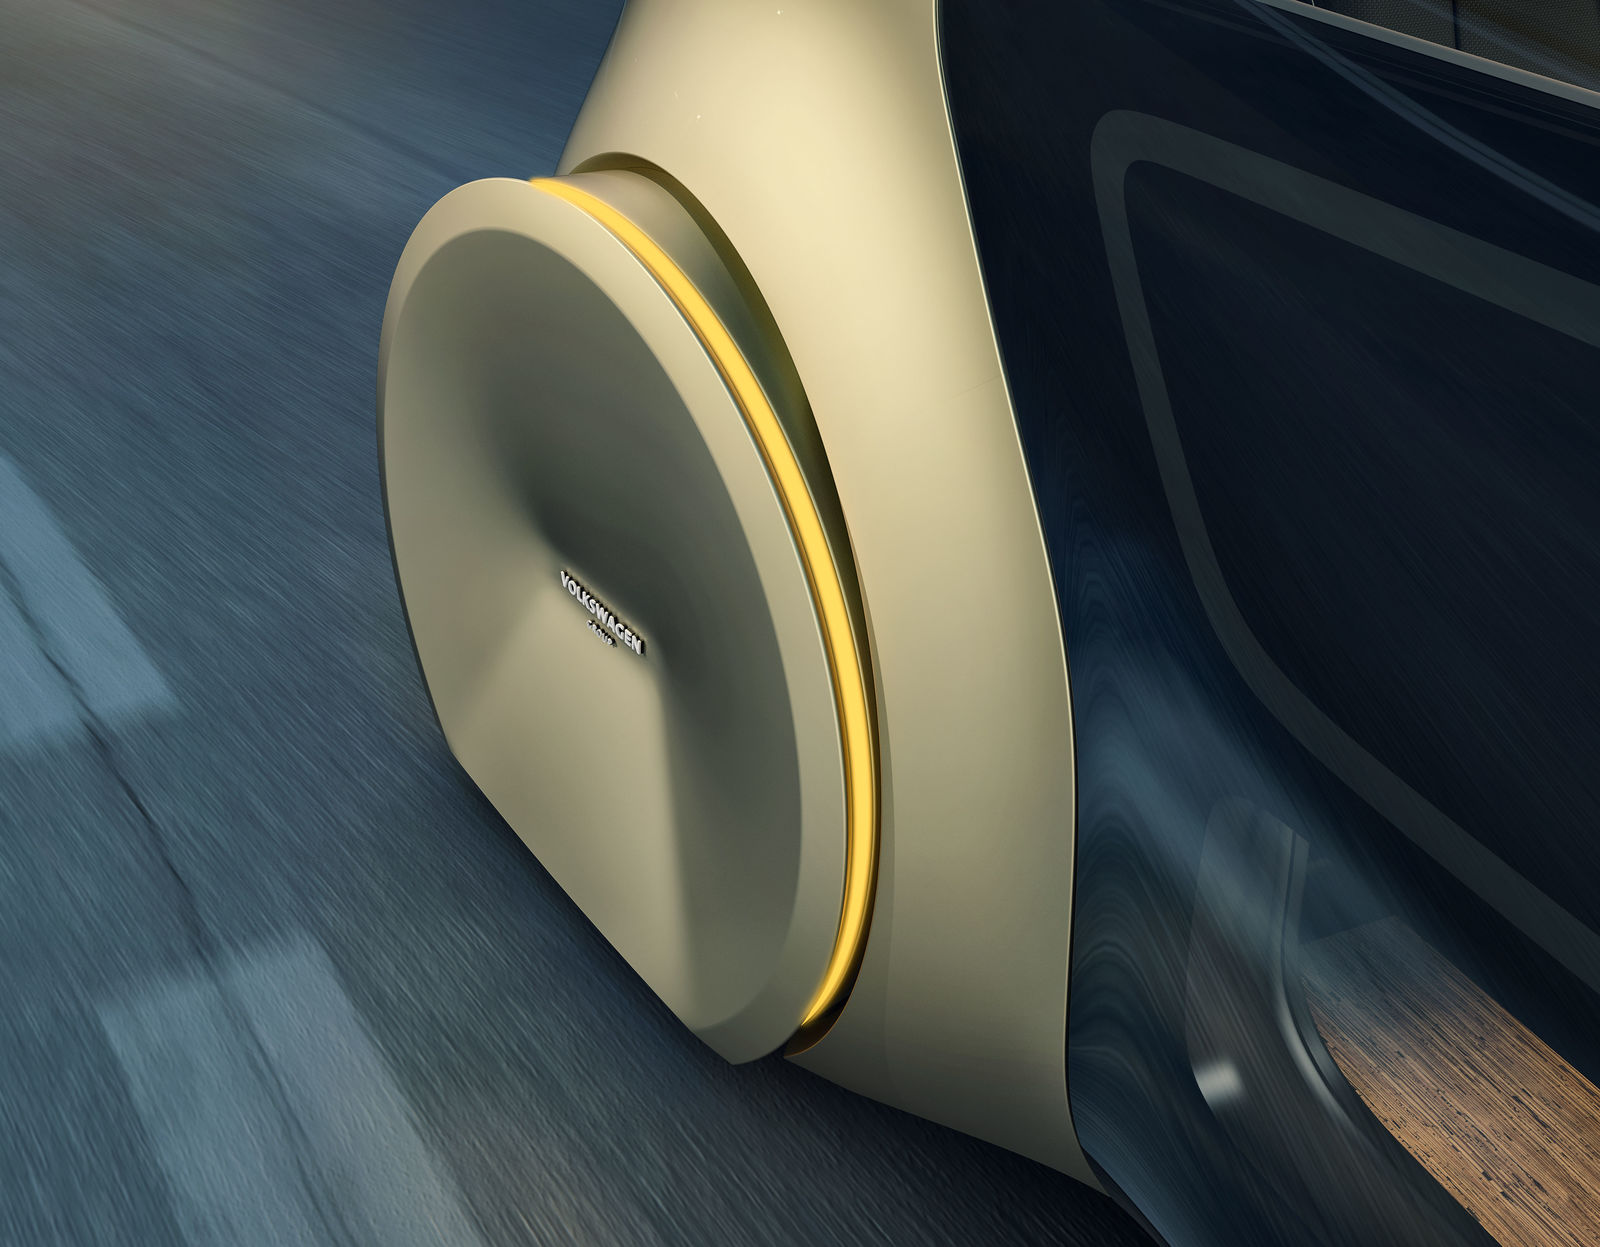 SEDRIC – The covered wheels are safe and highlight the futuristic appearance of the concept car.